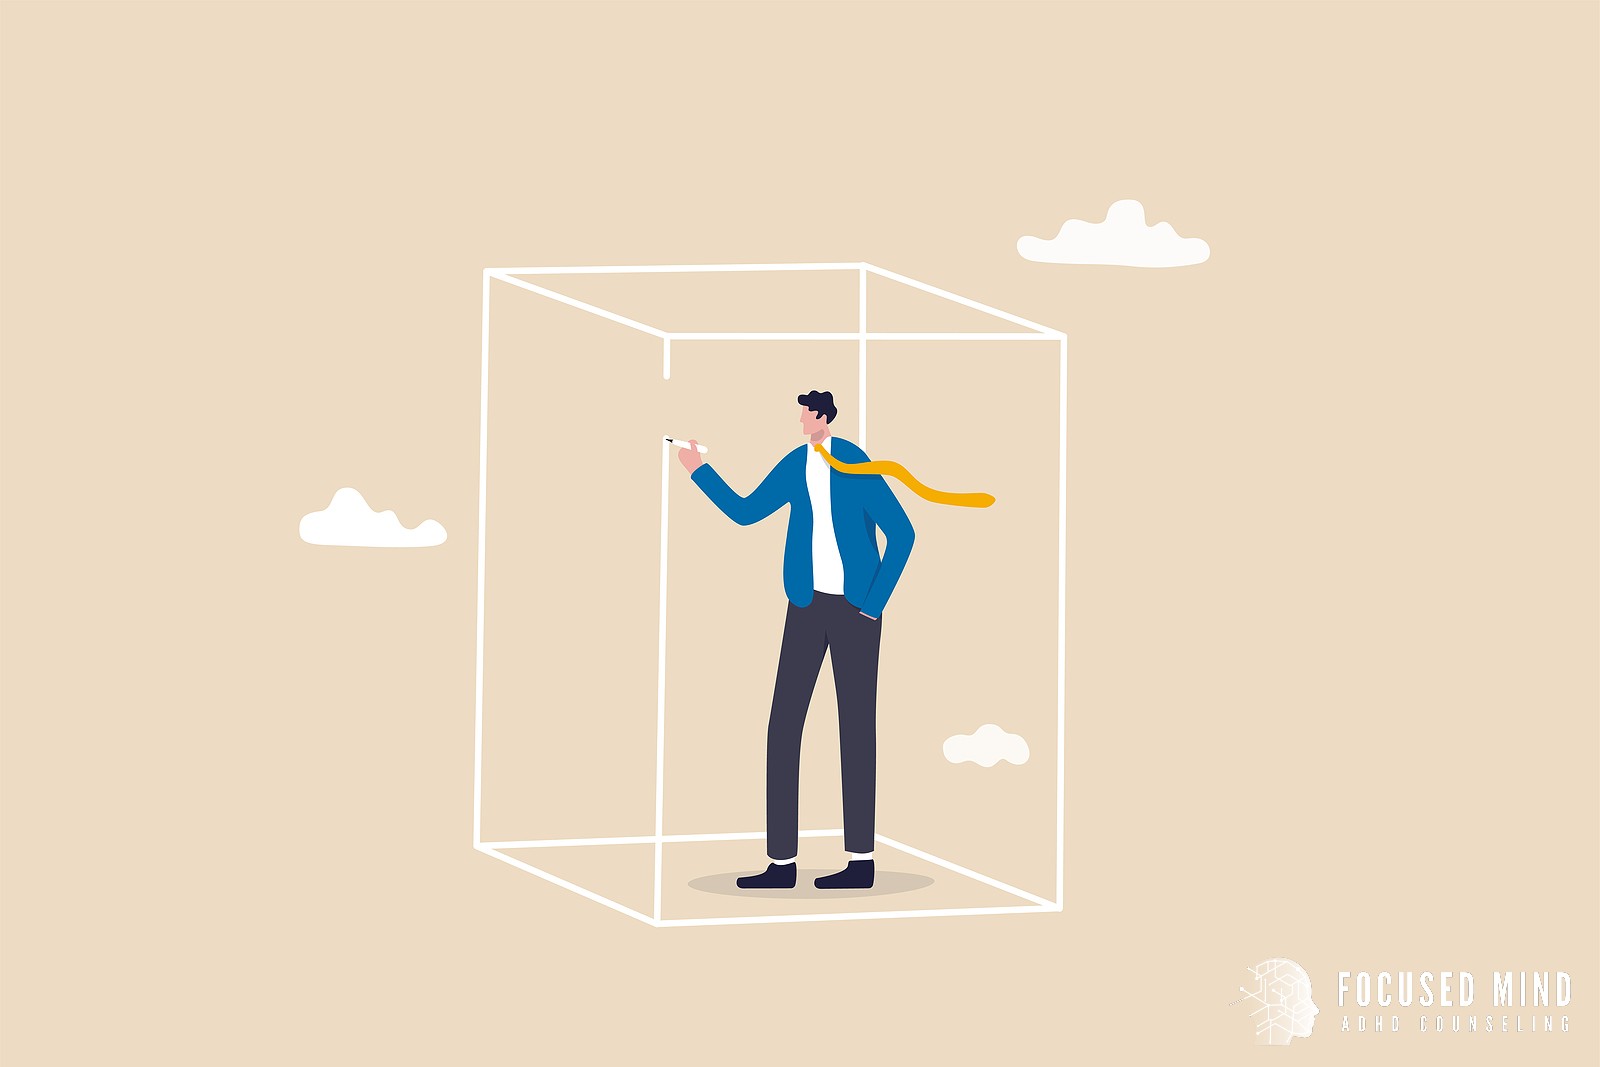 A graphic of a person standing in a box for Focused Mind ADHD Counseling. Learn more about ADHD and boundaries in Columbus, OH by searching "ADHD symptoms Ohio" or "ADHD specialist near me" today.